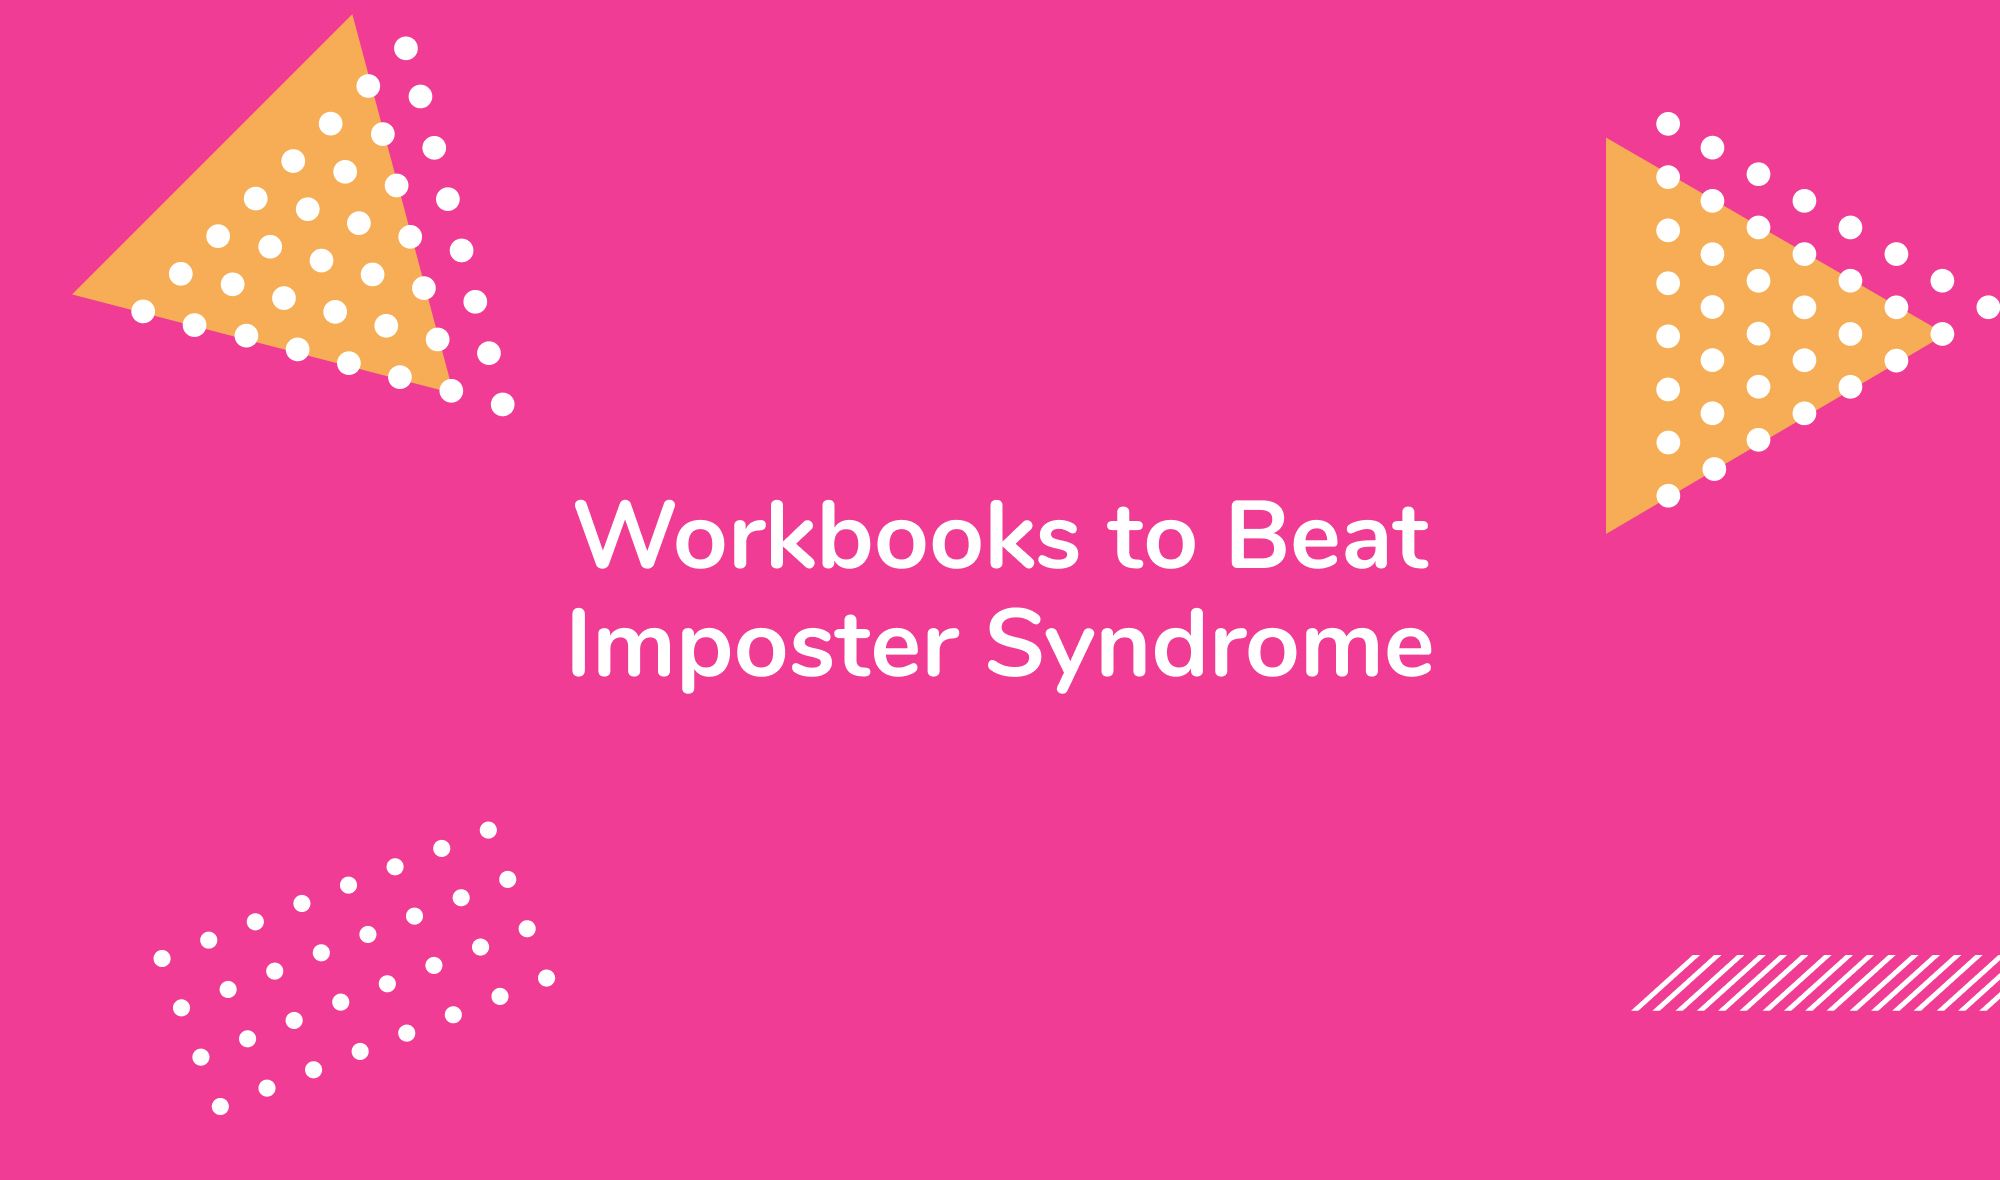 Workbooks to Beat Imposter Syndrome